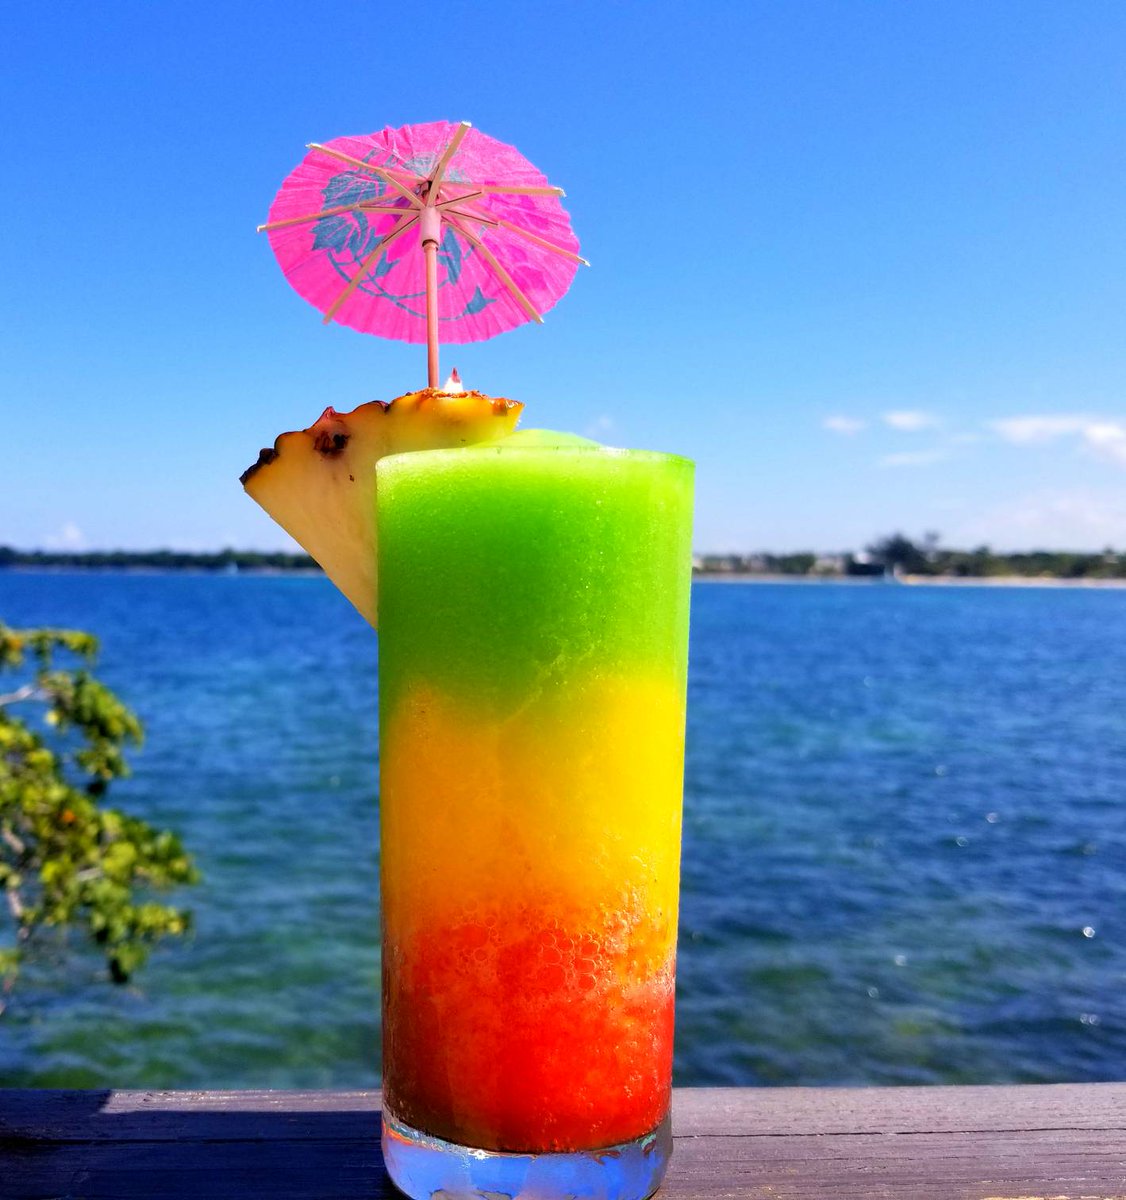 Your vacation experience isn't complete without a Bob Marley Cocktail. Have you ever tried this artfully prepared cocktail? #InternationalDrinks